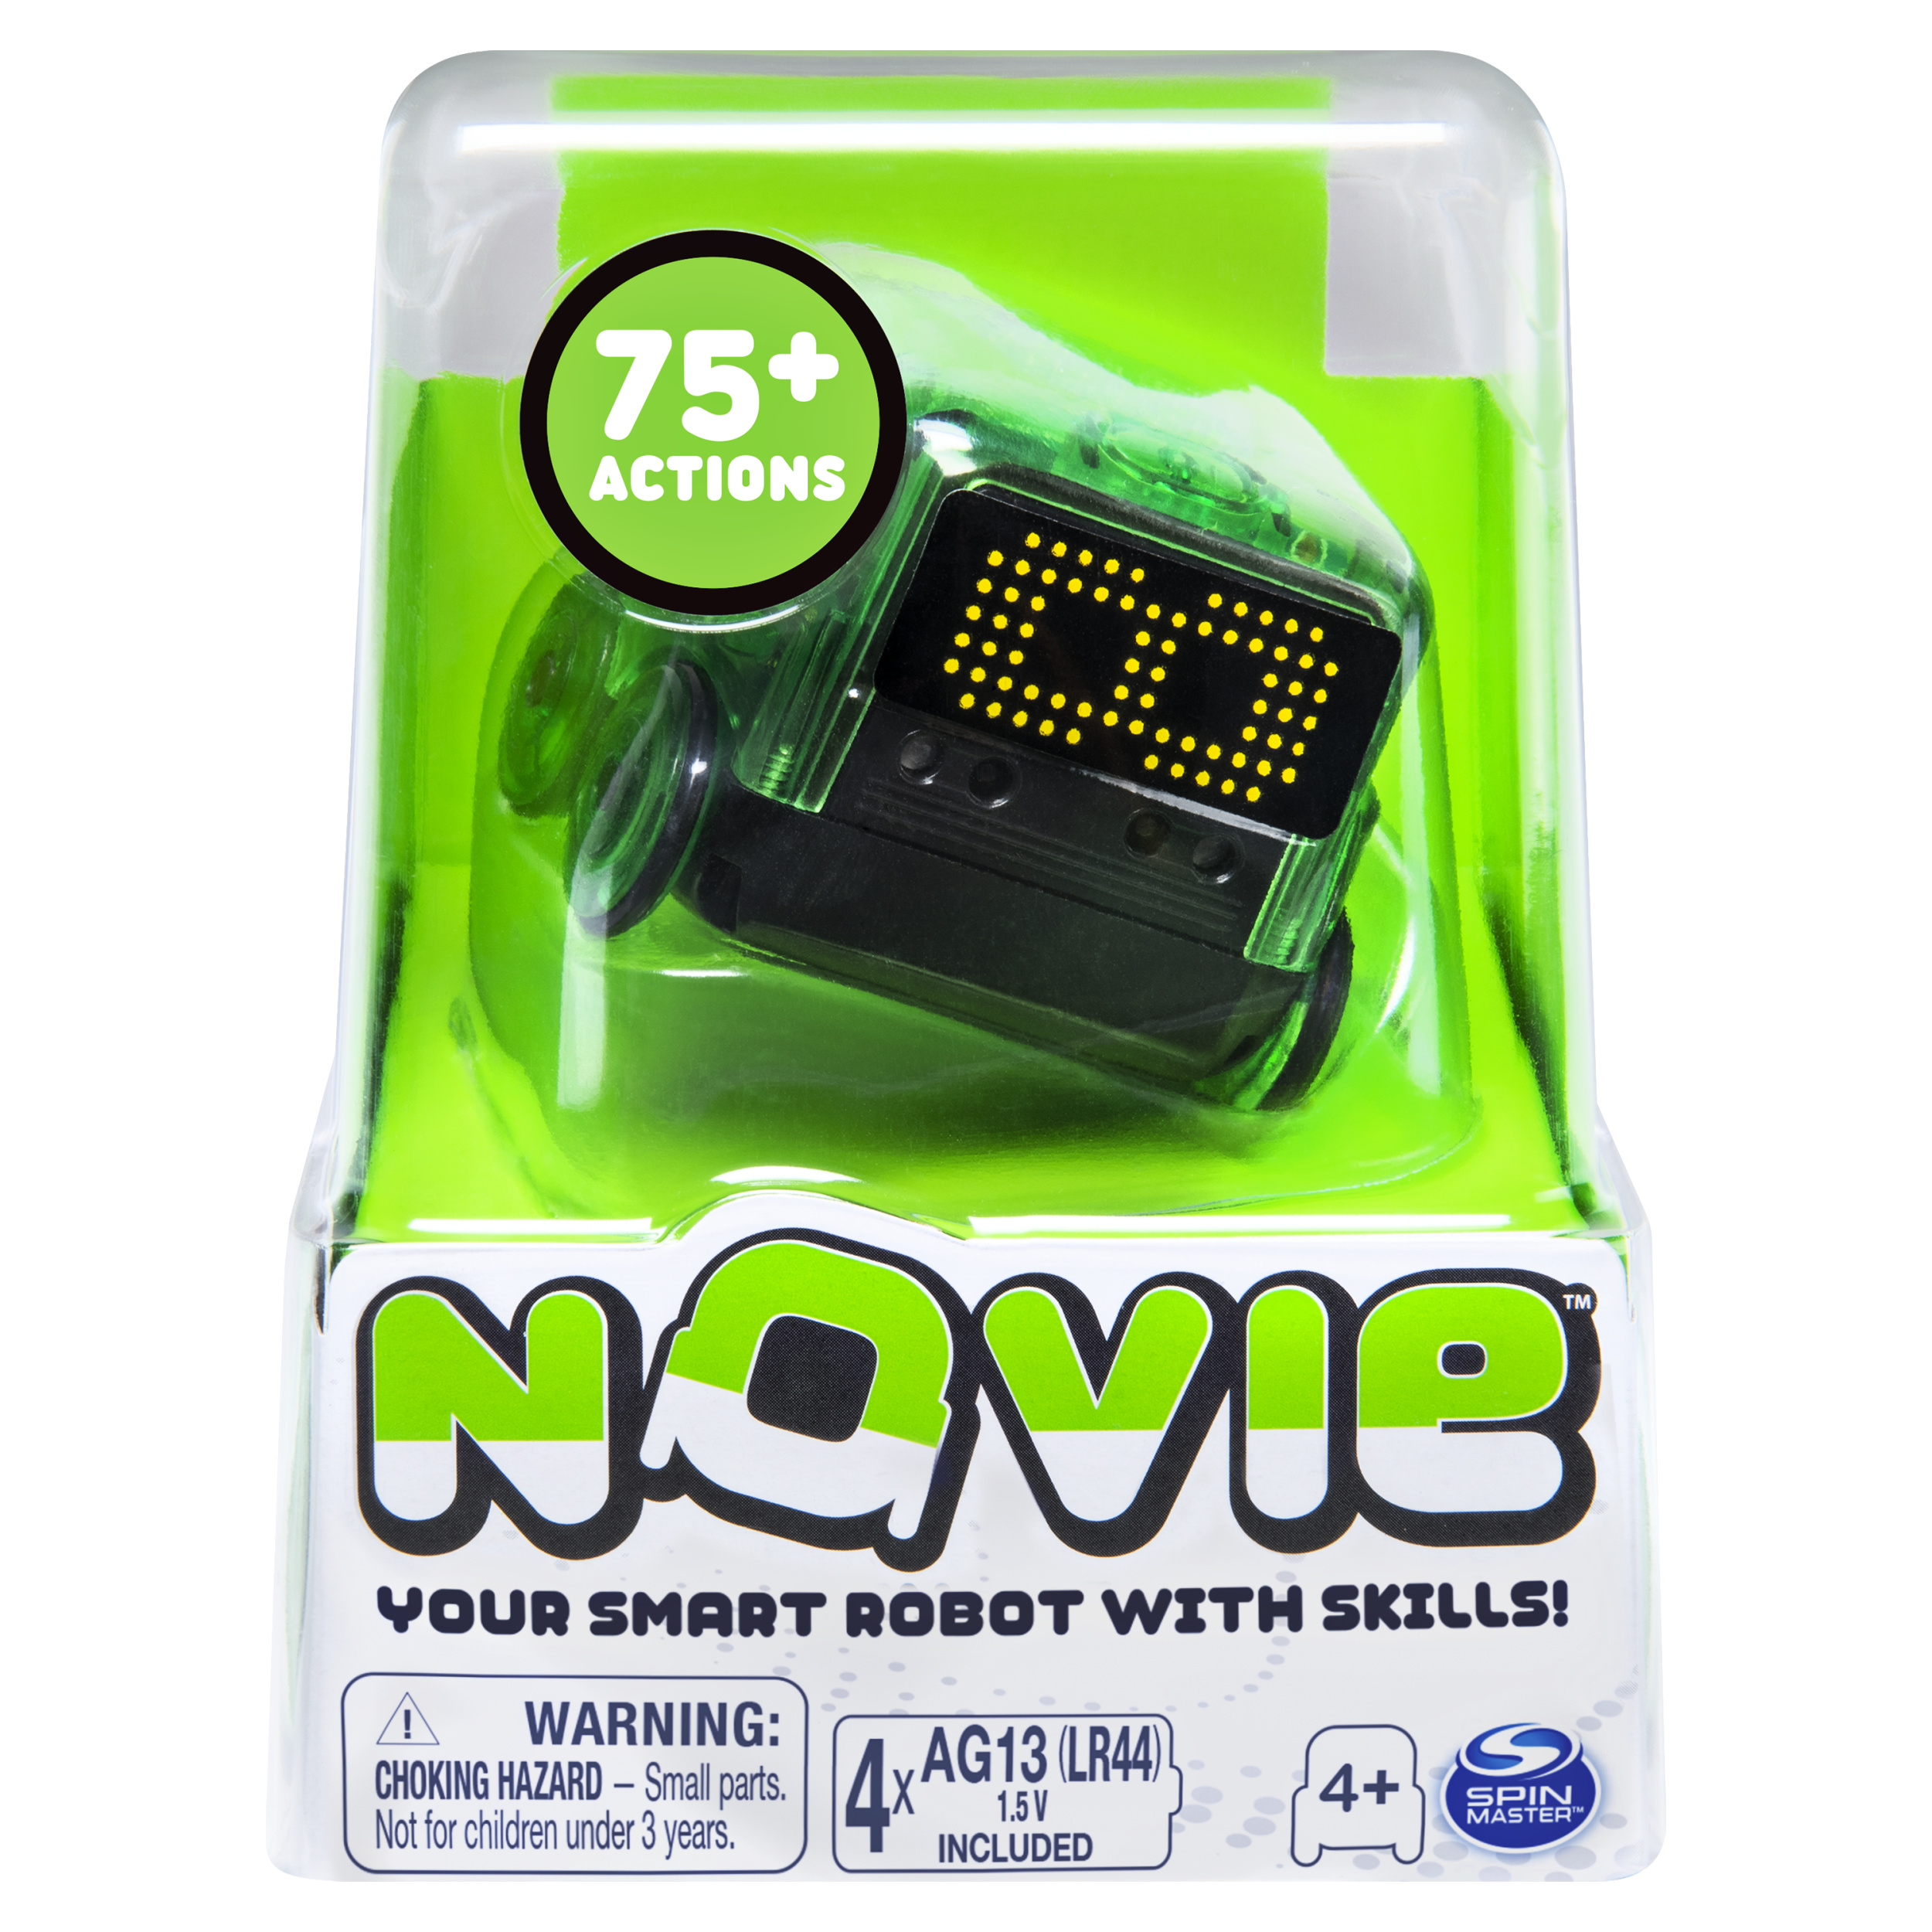 Novie, Interactive Smart Robot with Over 75 Actions and Learns 12 Tricks for Kids Aged 4 and Up - Pickup Today! Colors may vary, 1 item - image 5 of 7